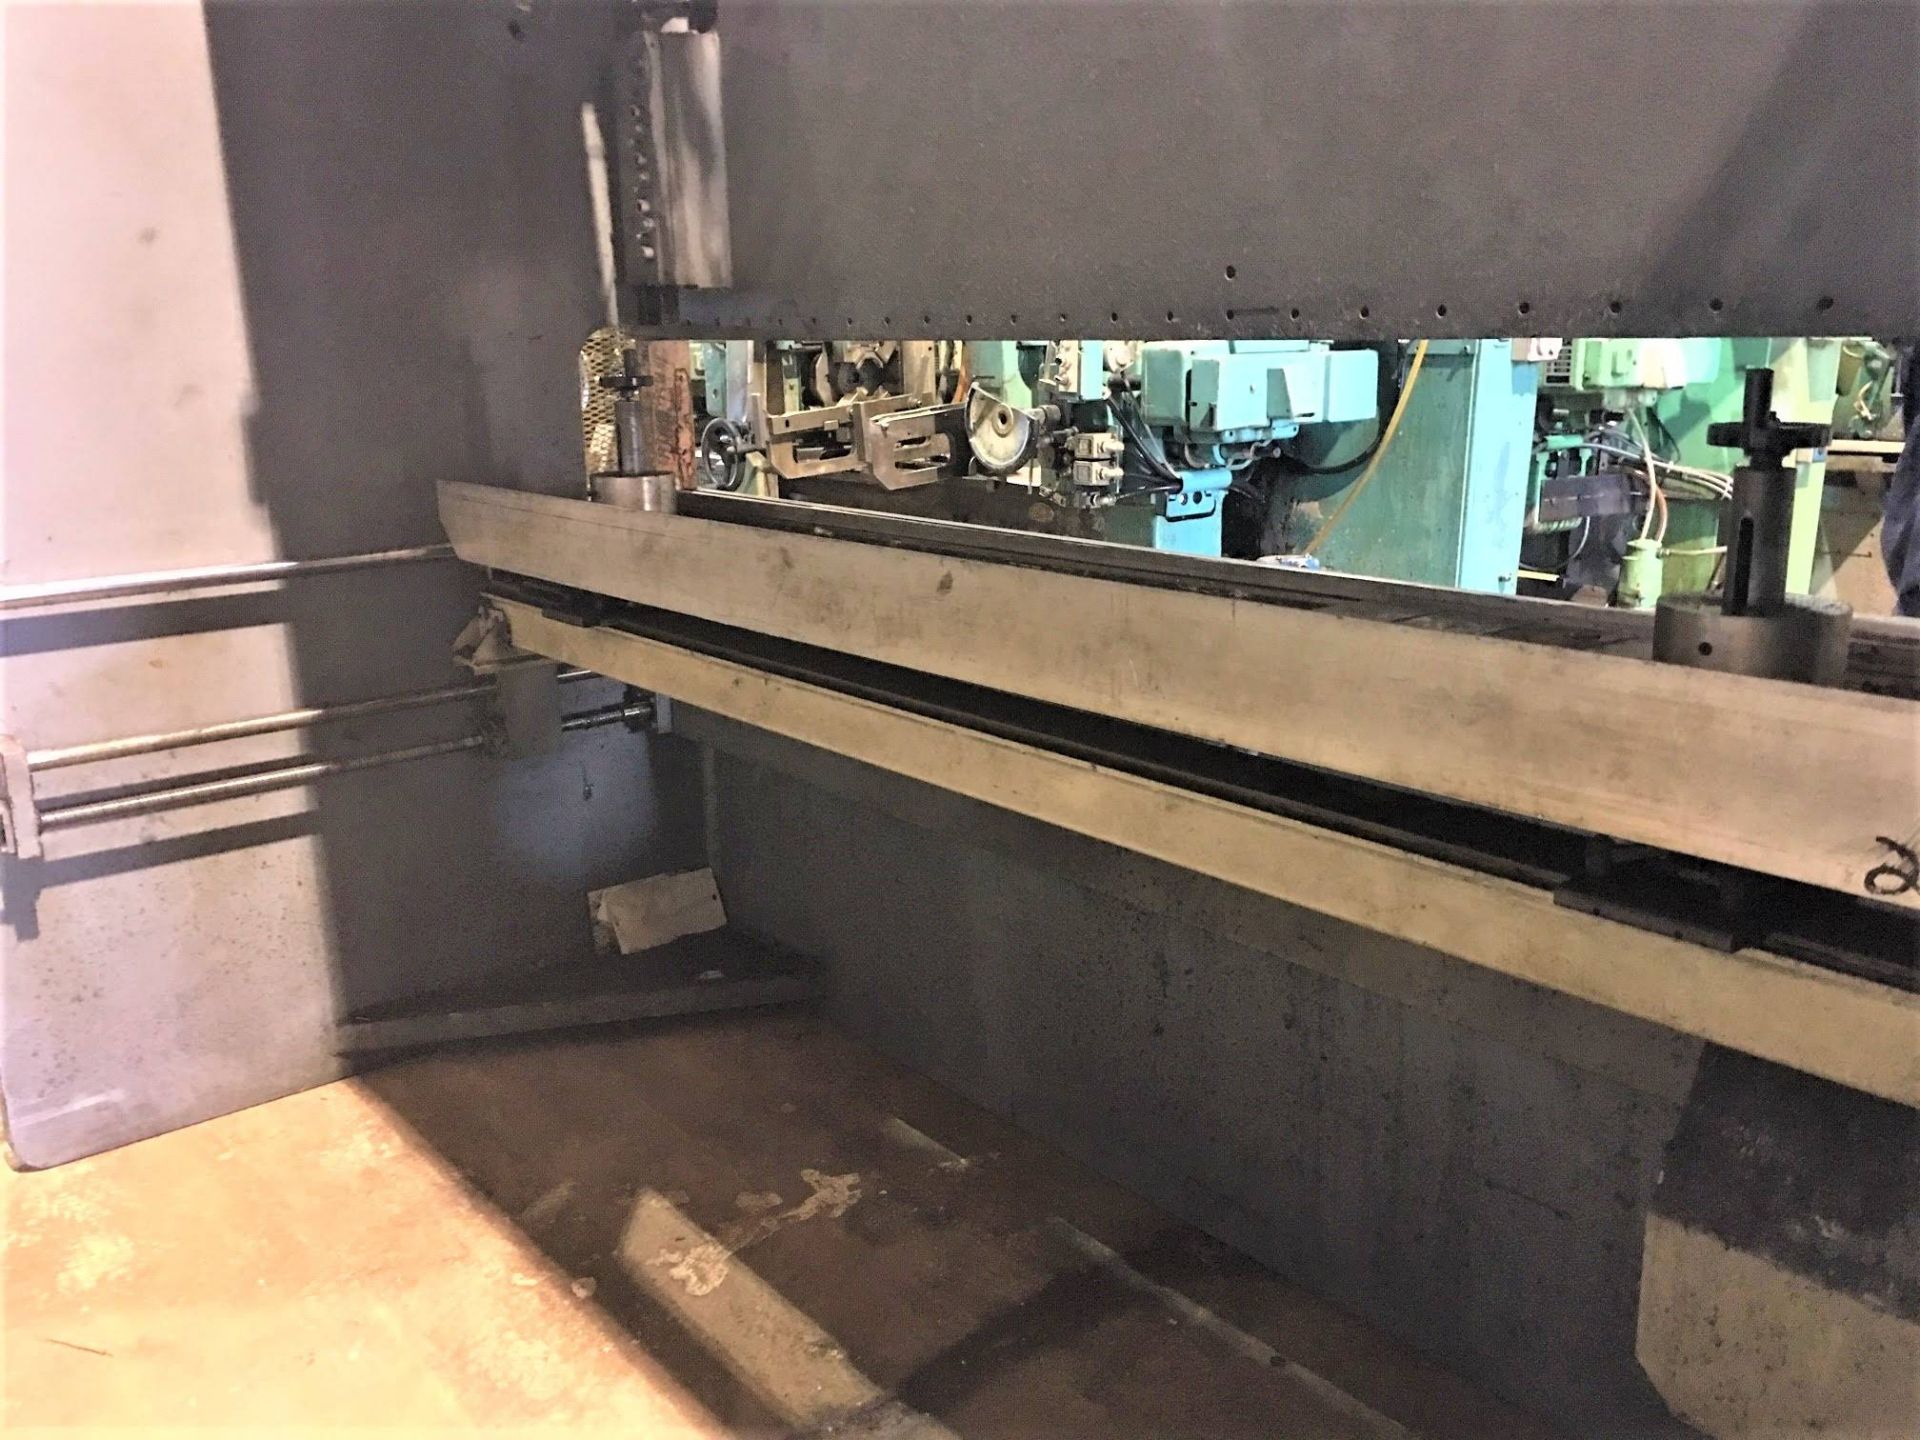 Haco Atlantic CNC Hydraulic Press Brake 120 Ton x 10', Located In Painesville, OH - 8615P - Image 8 of 14